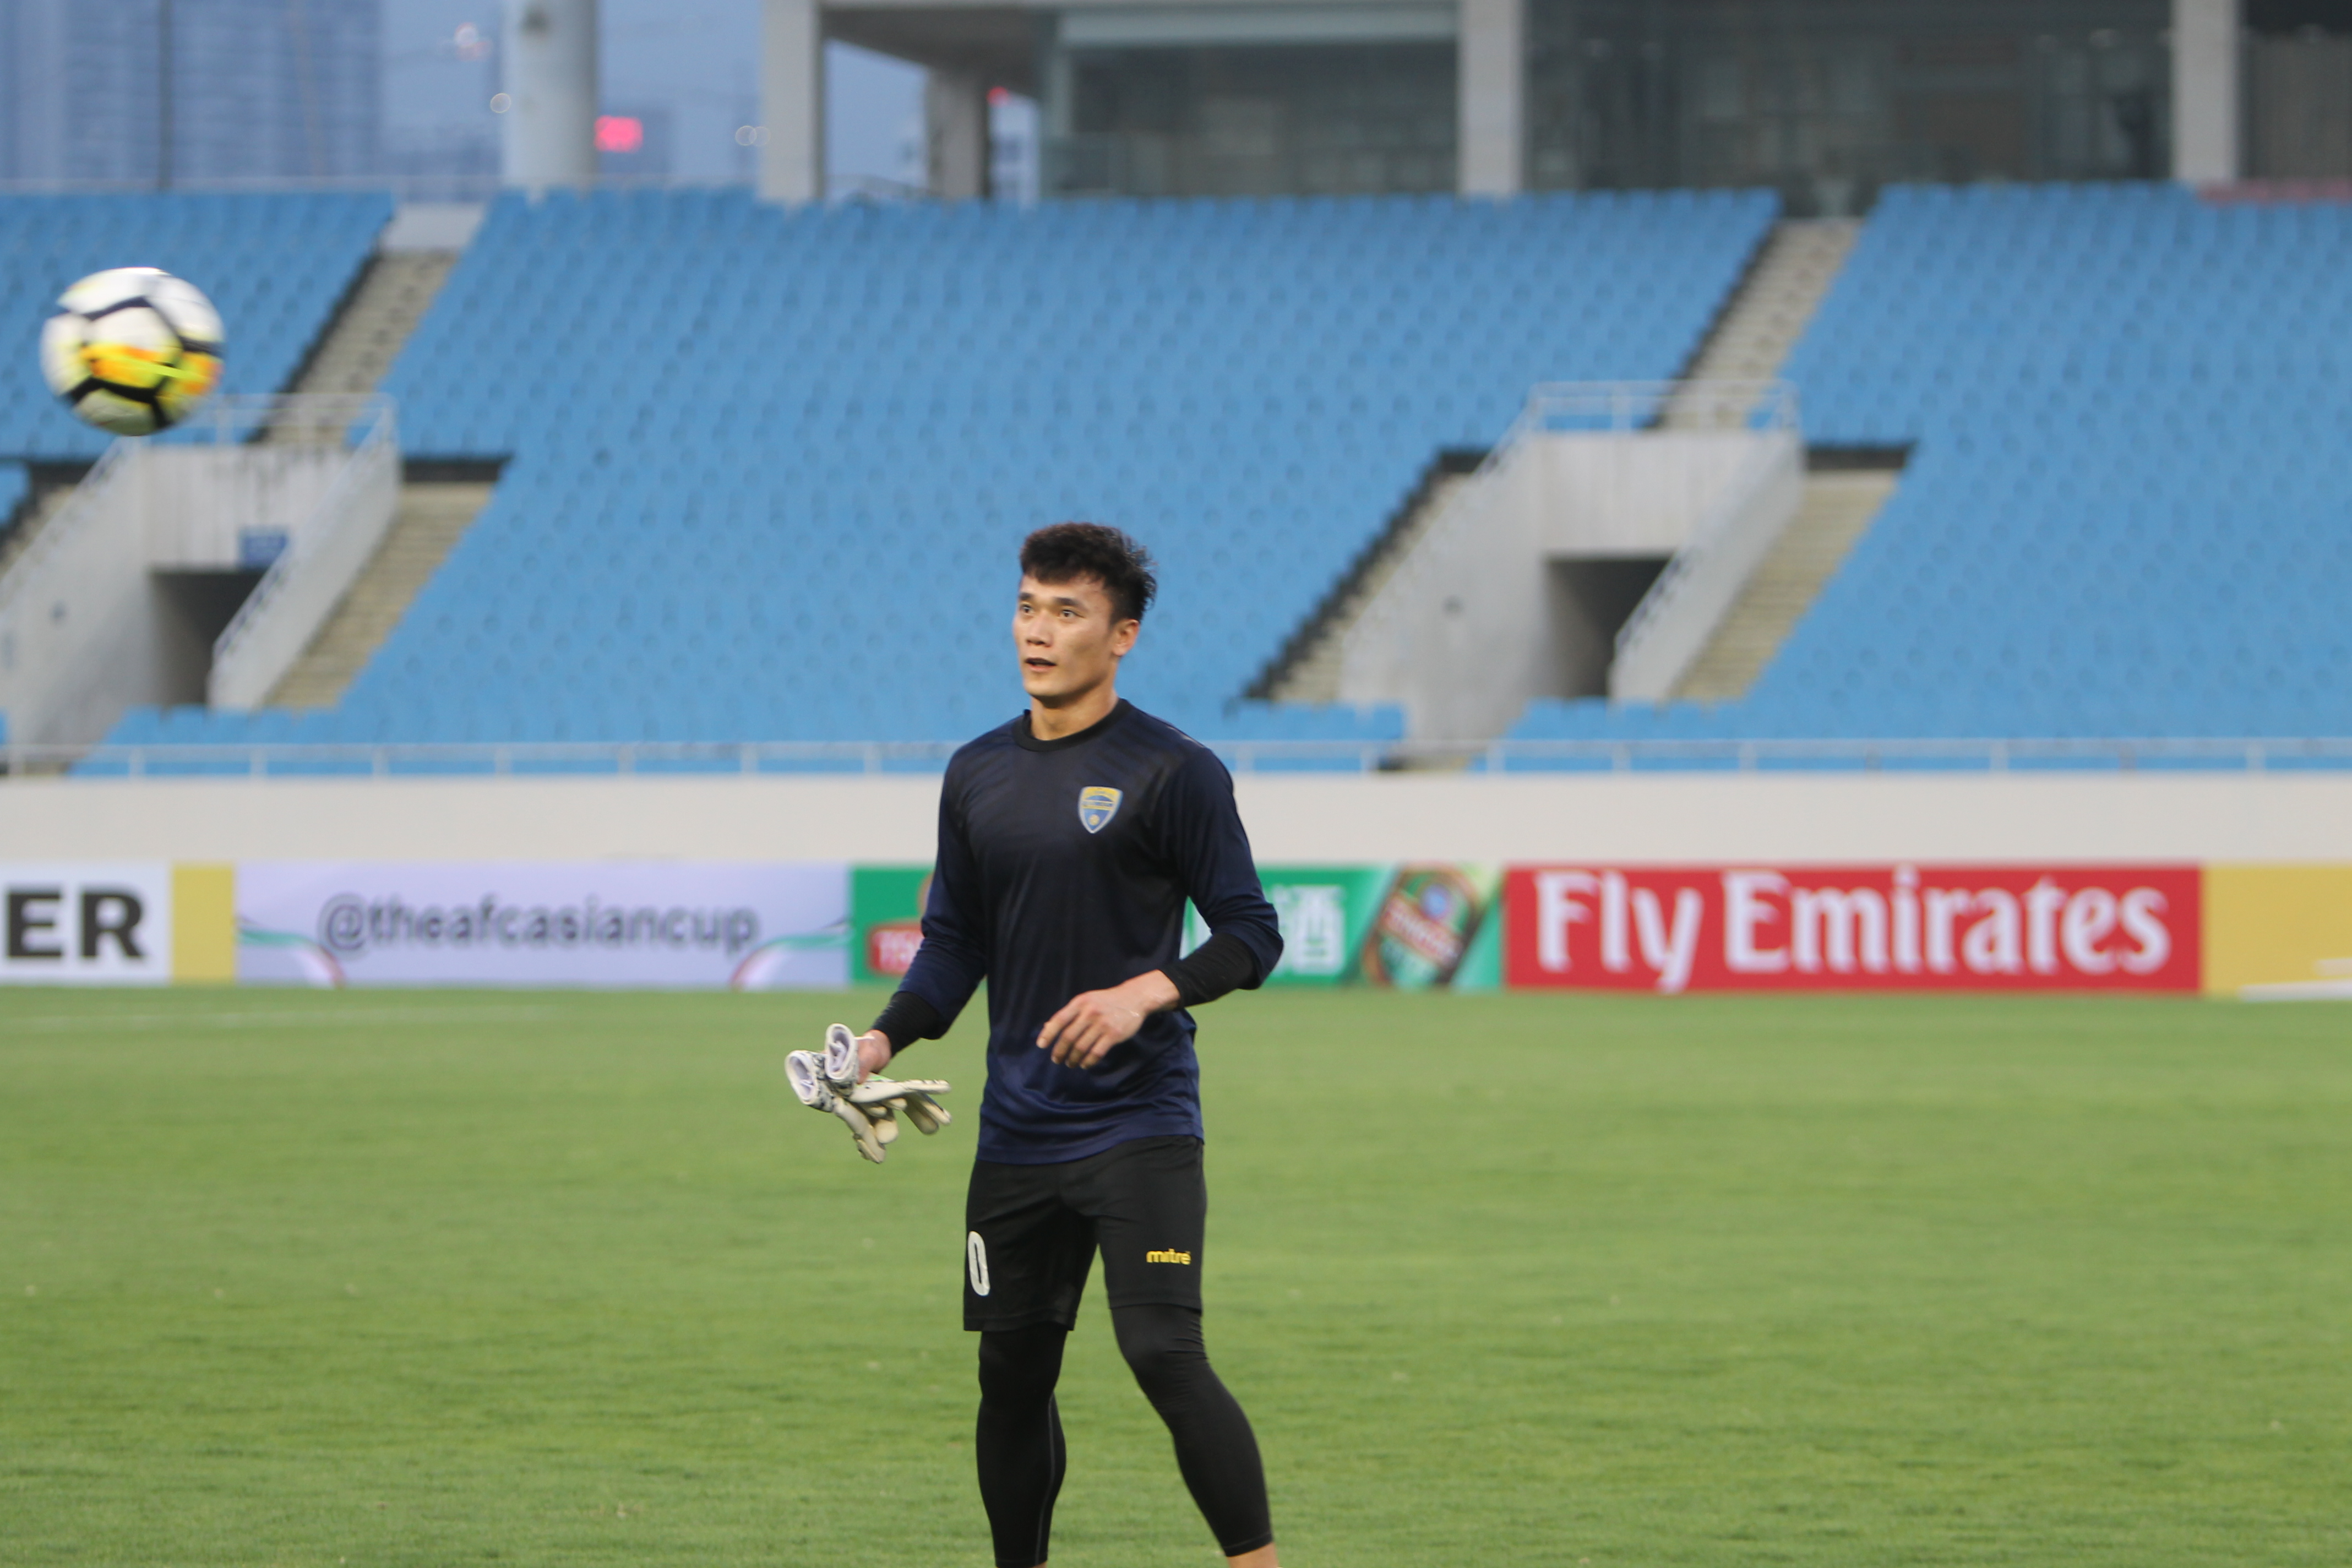 tien dung, flc thanh hoa, yangon united, afc cup